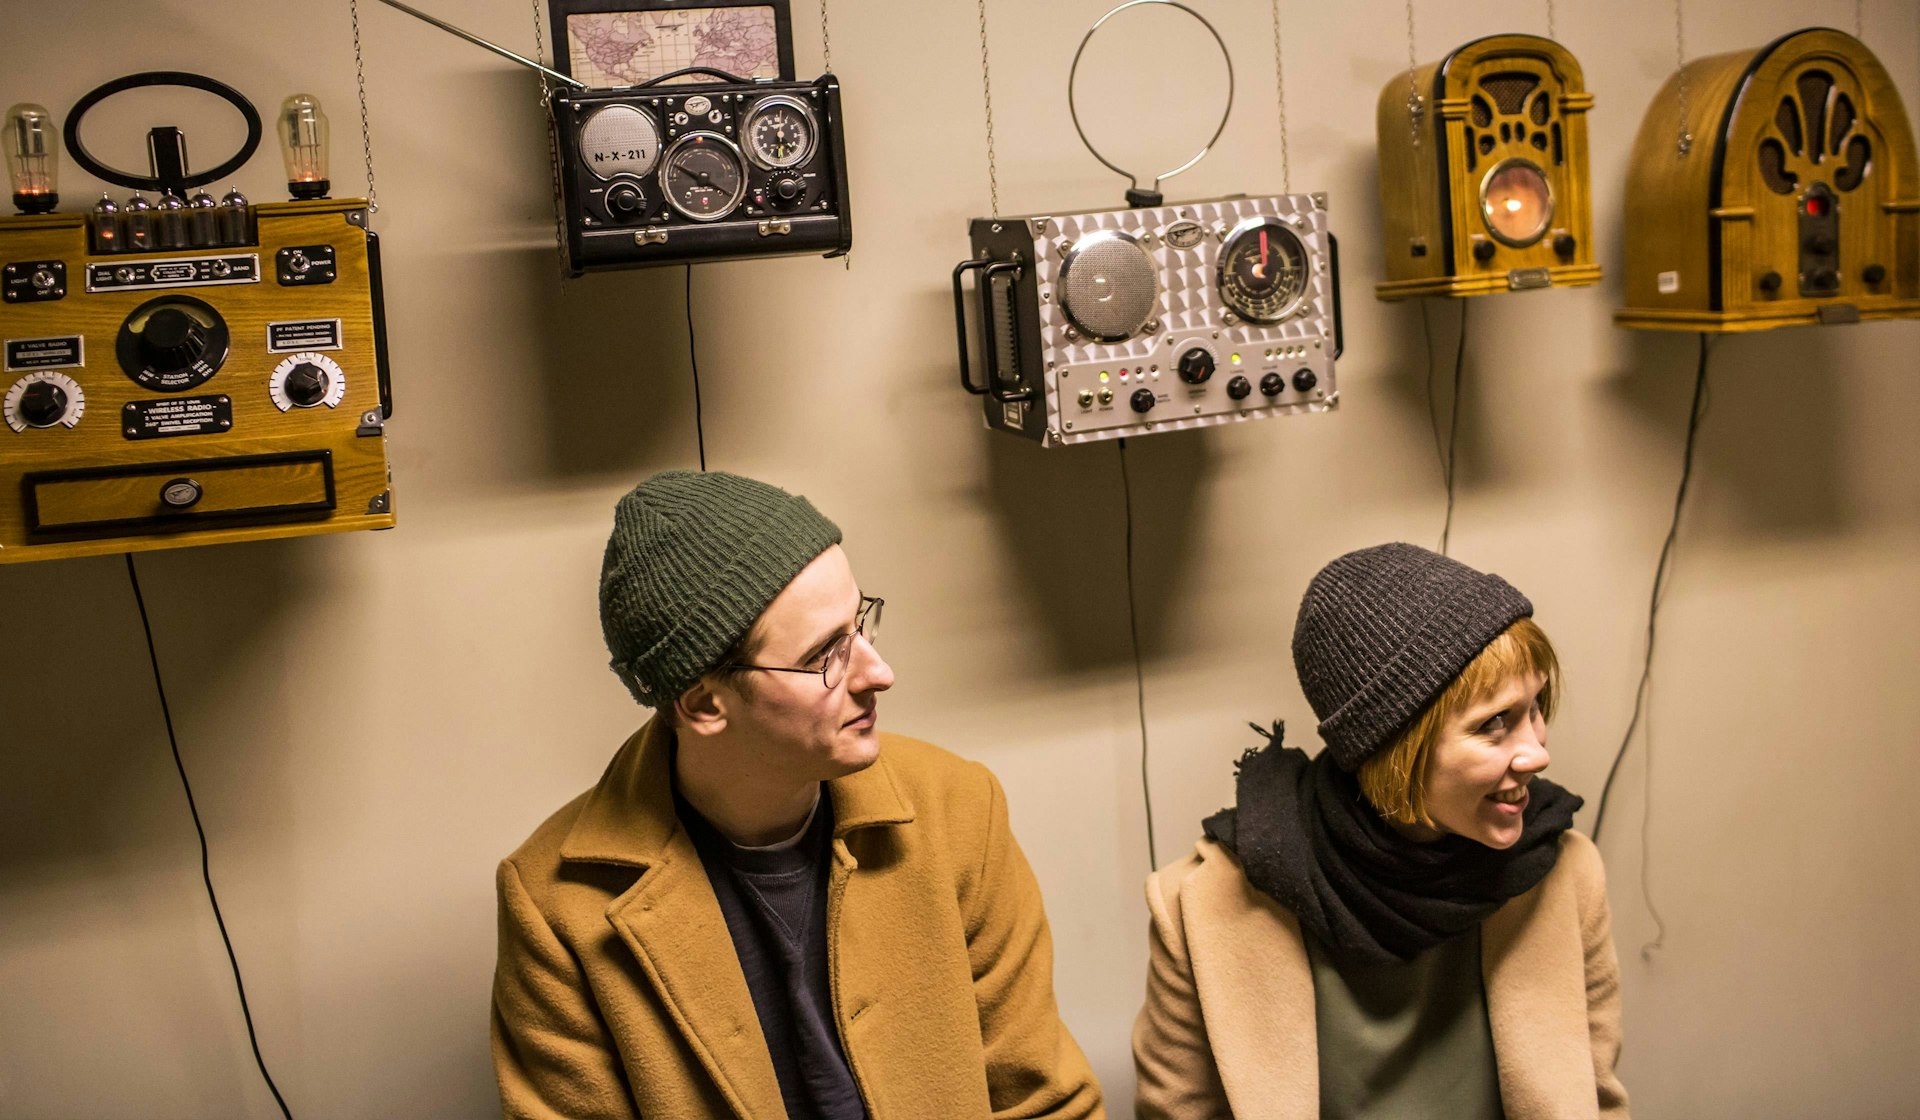 DIY radio station Follow Me are bringing independent music to Russia's unsuspecting ears